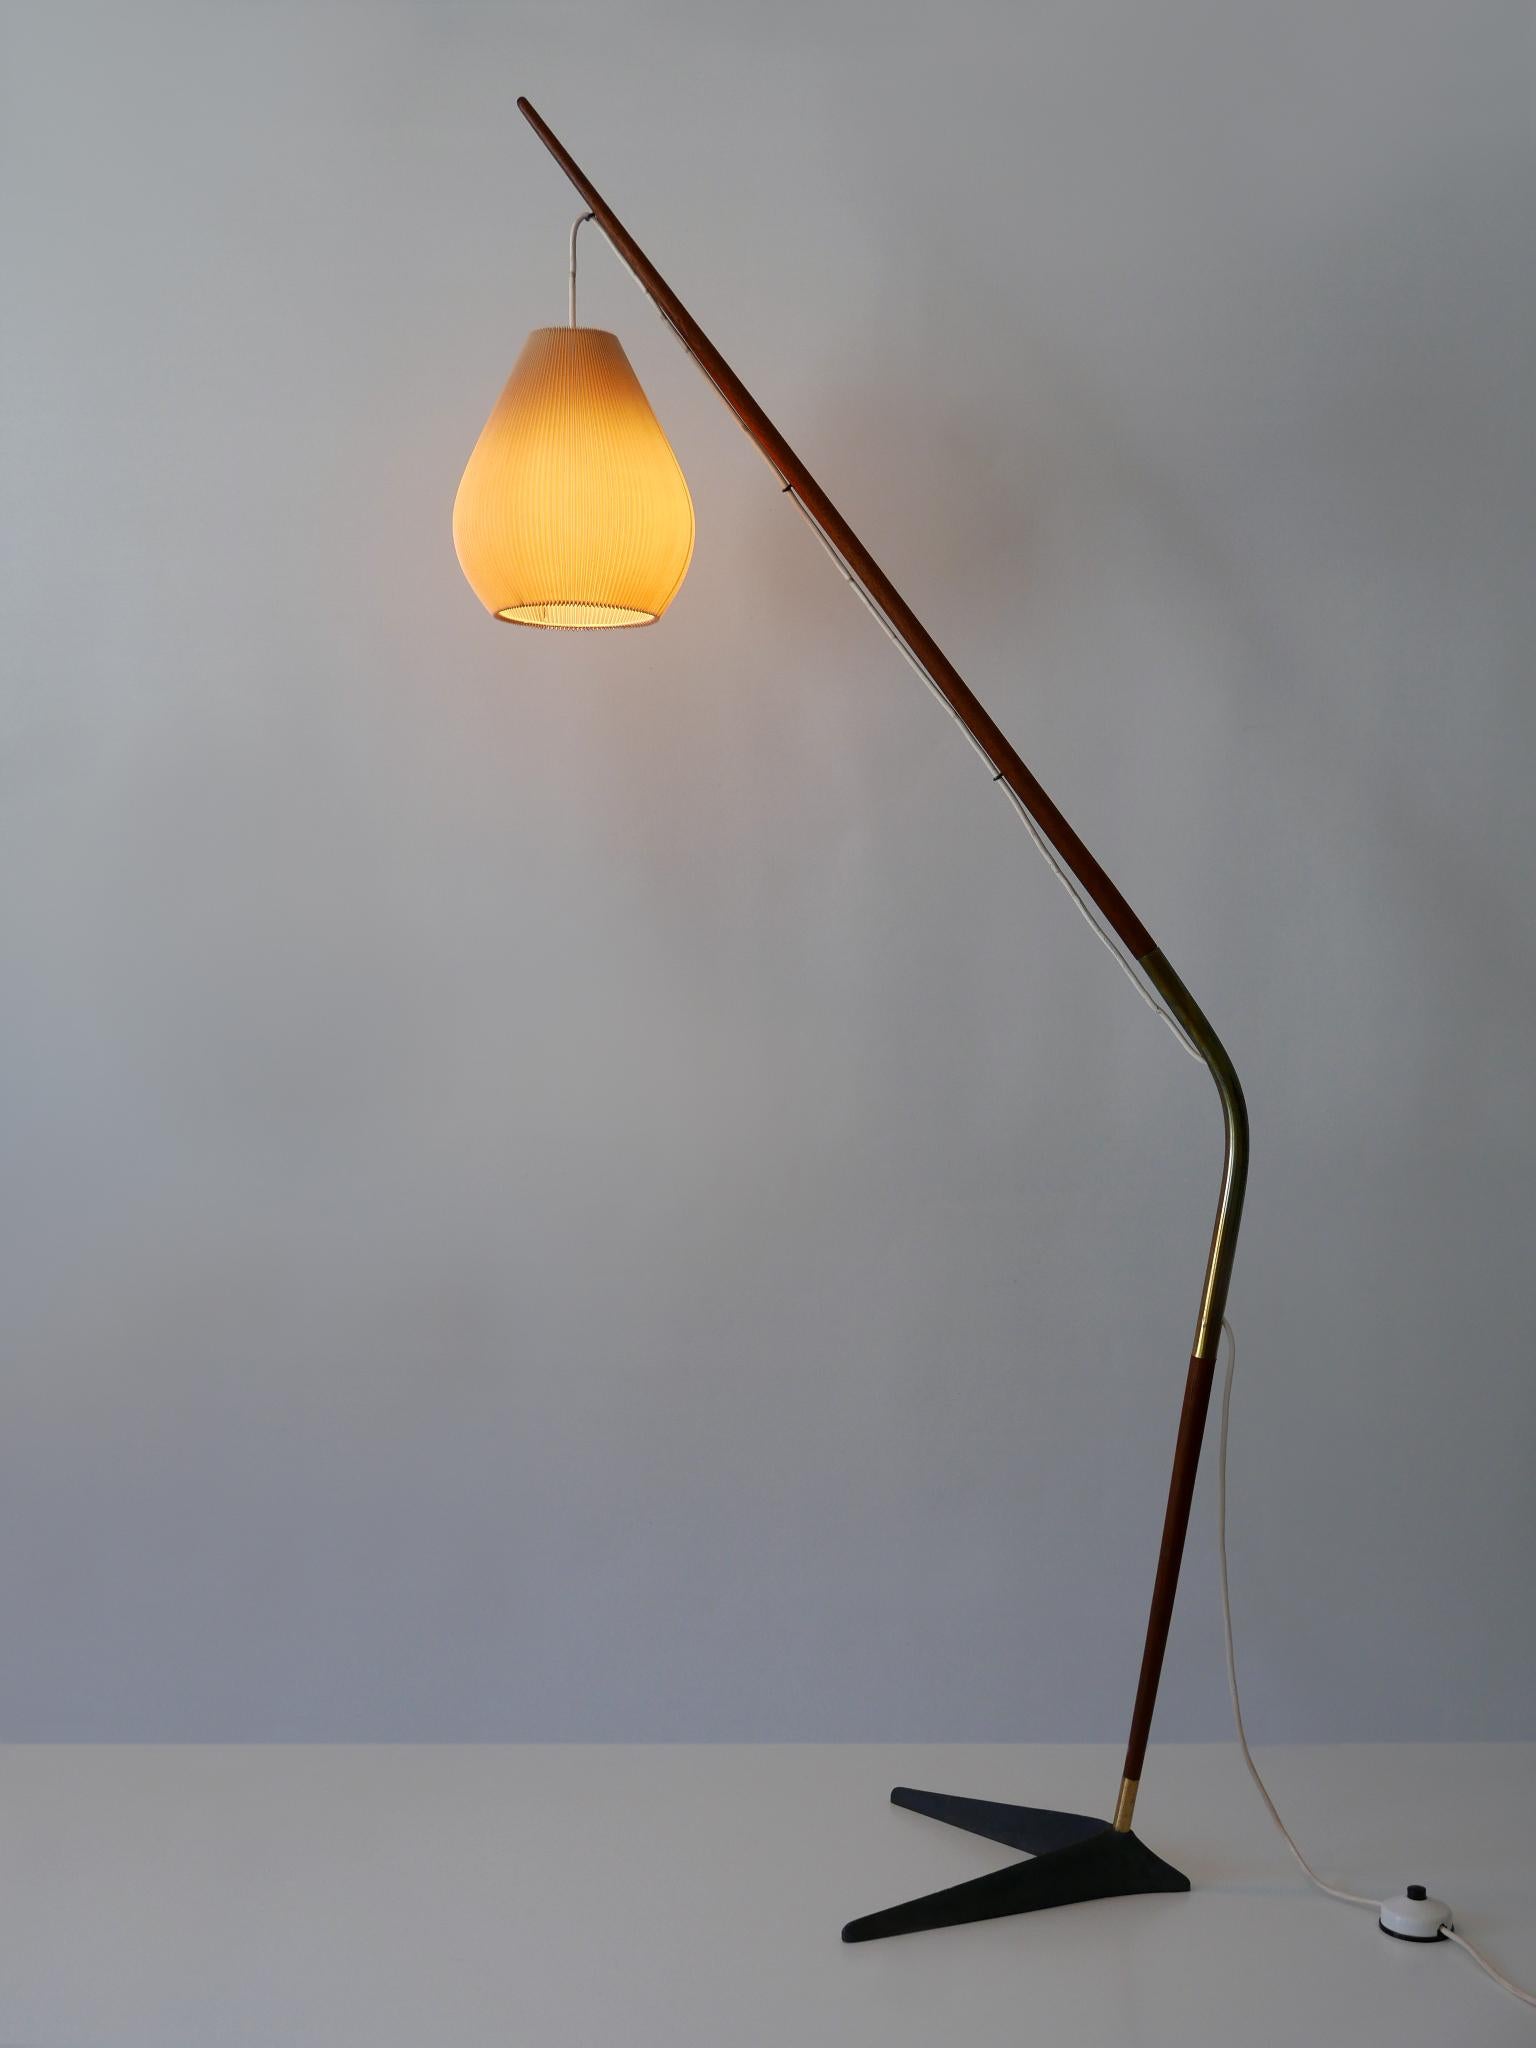 Exceptional 'Fishing Pole' Floor Lamp by Svend Aage Holm Sørensen Denmark 1950s For Sale 3